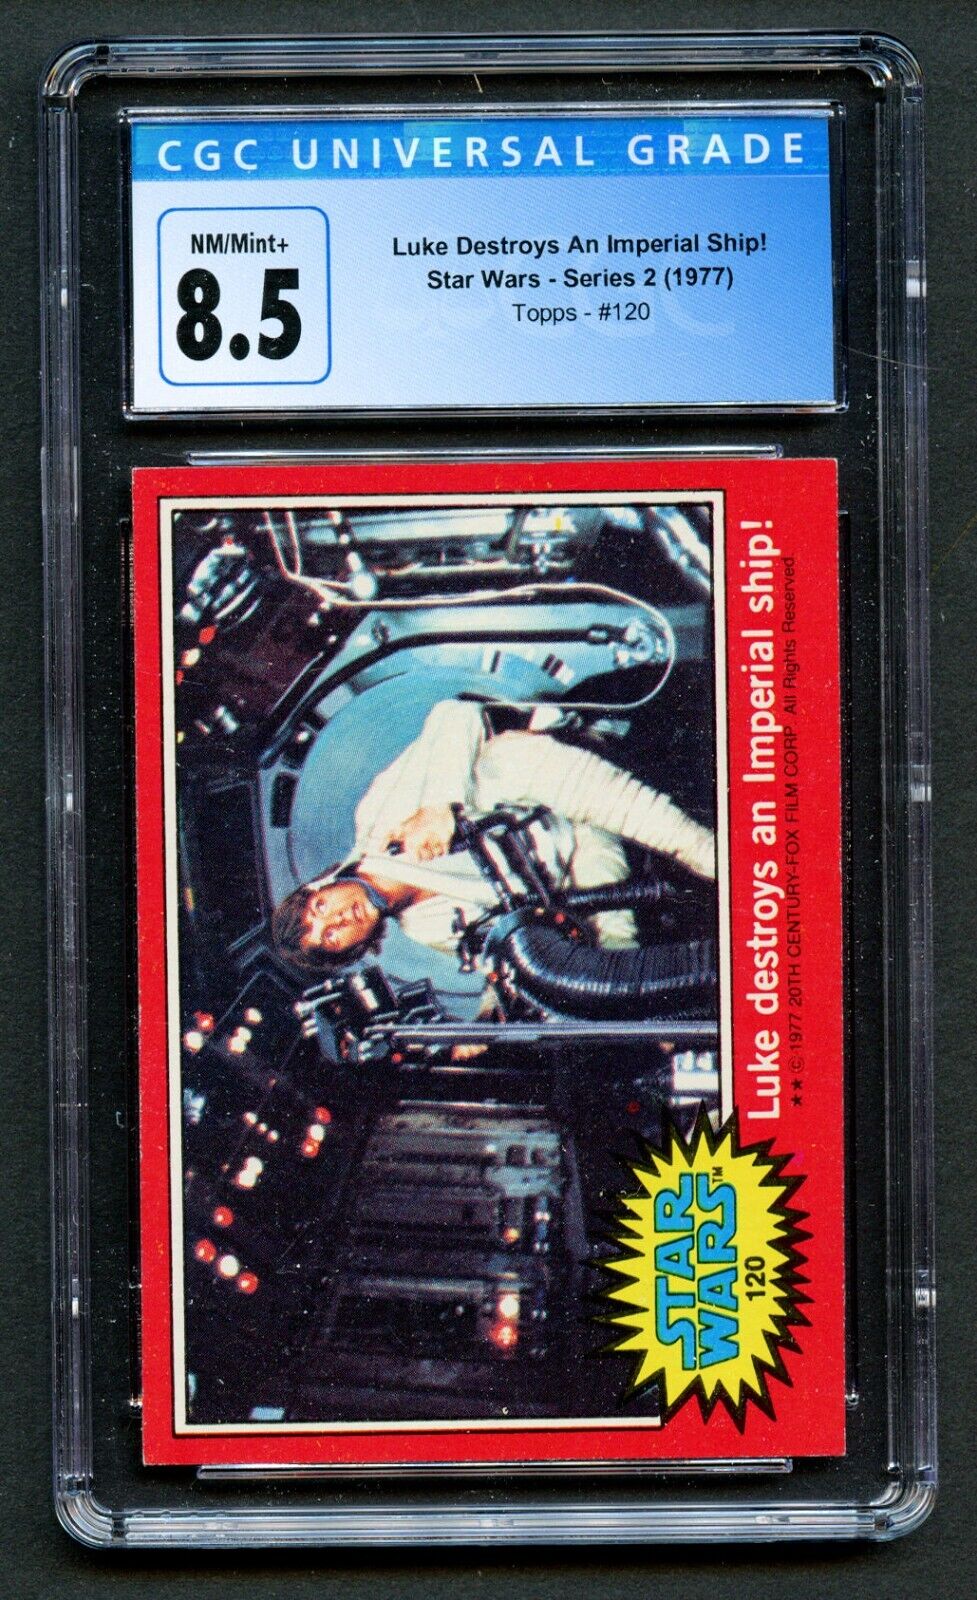 Luke Destroys An Imperial Ship #120 Star Wars Red Series 2 Topps 1977 CGC 8.5